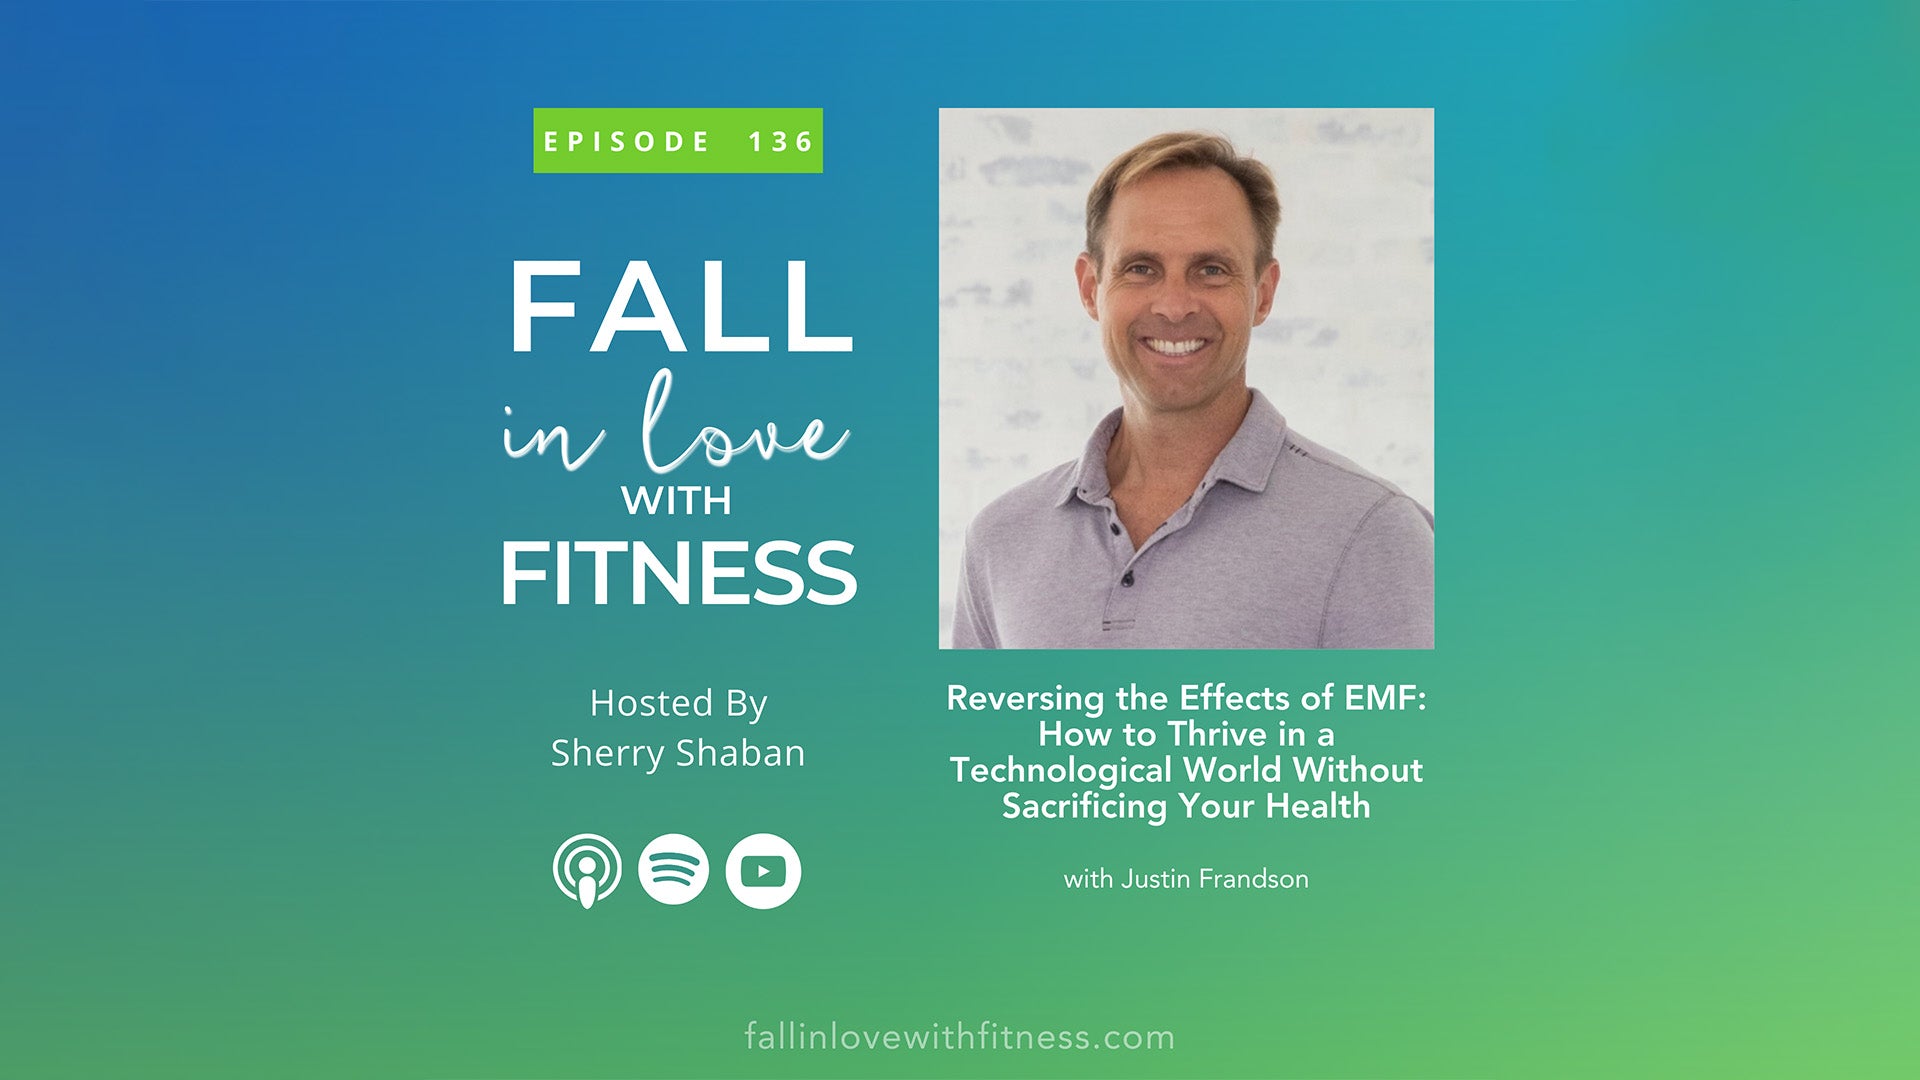 Reversing the Effects of EMF: How to Thrive in a Technological World Without Sacrificing Your Health with Justin Frandson